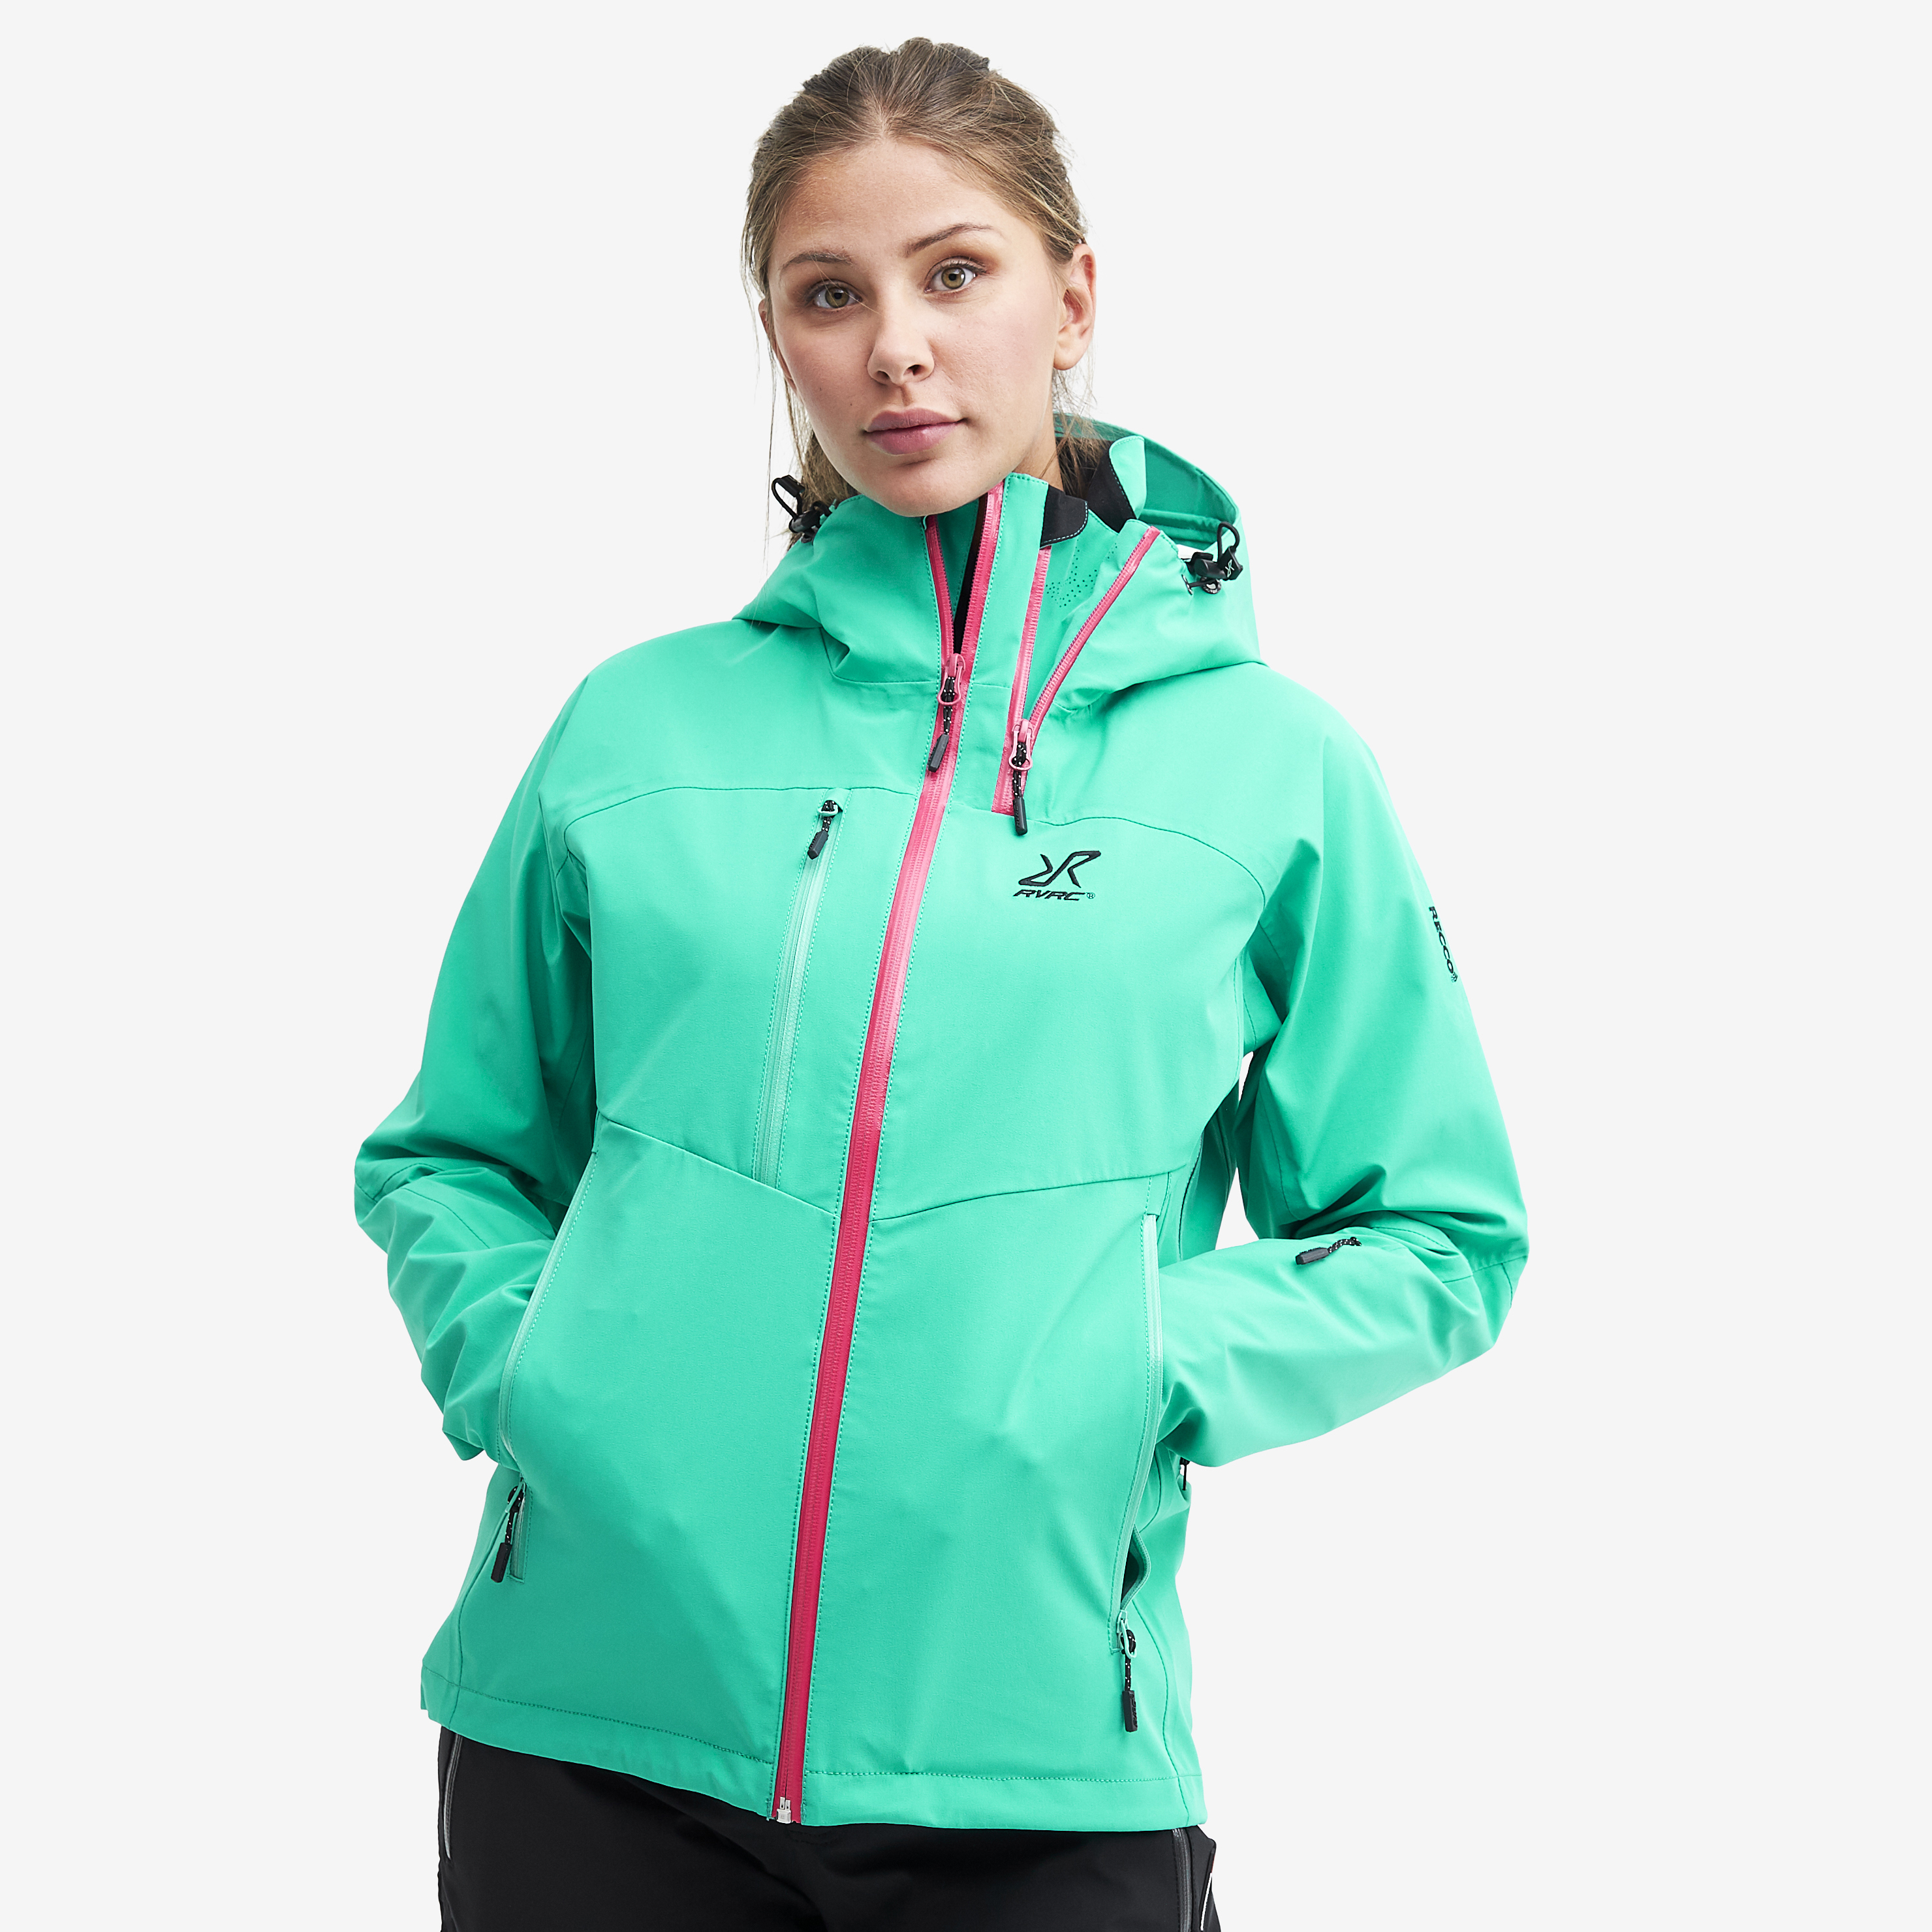 Cyclone Rescue Jacket 2.0 Spectra Green Mujeres